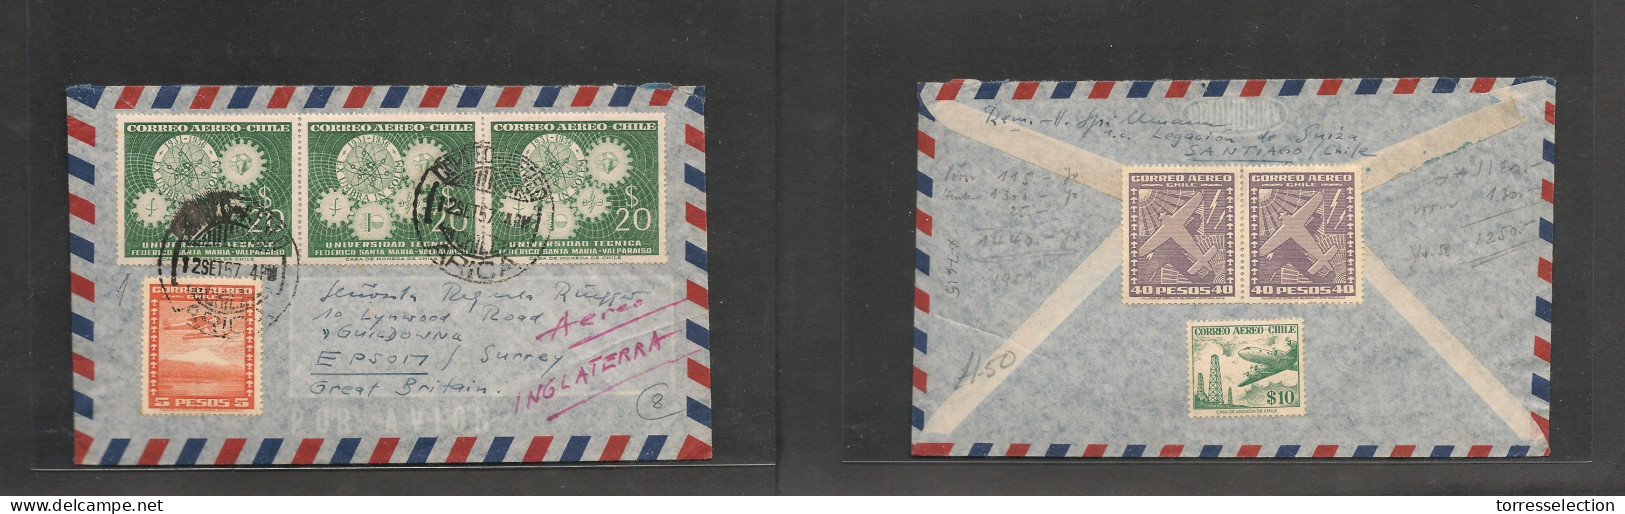 CHILE. Chile Cover - 1957 Arica To Epsom Uk Air Mult Fkd Env 155$ Pesos Rate, Interesting XSALE. - Chile